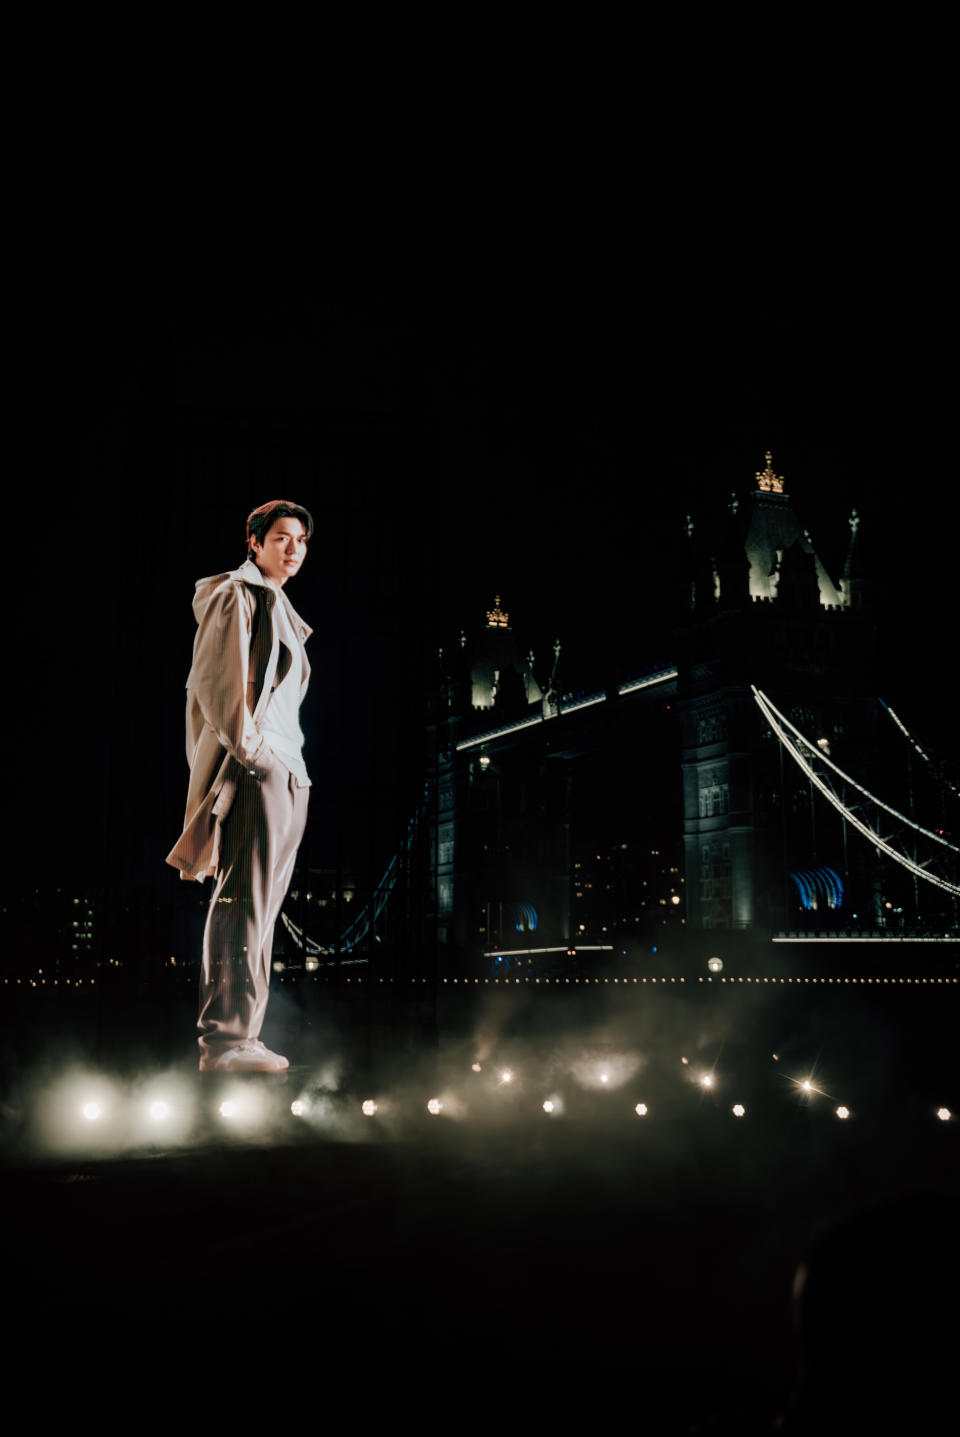 A 10-meter hologram of Lee Min-ho projected by Boss in London